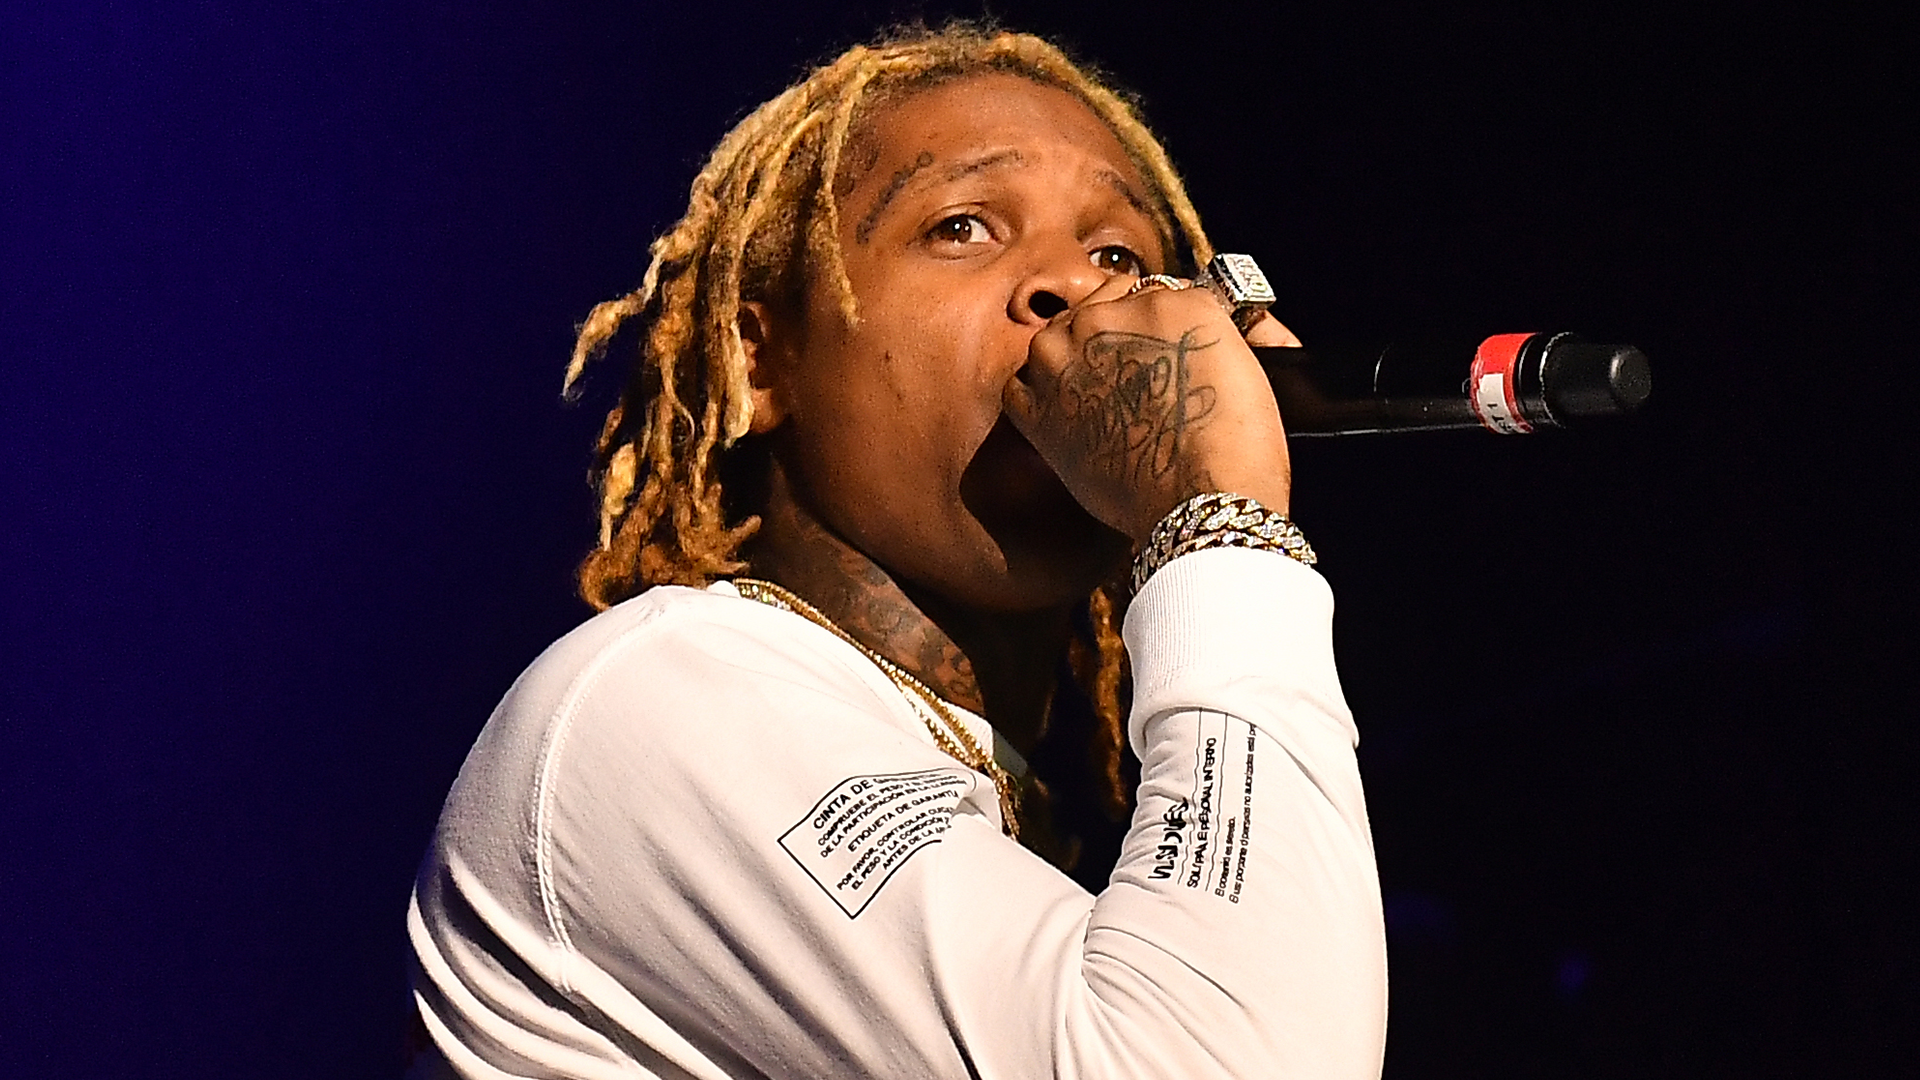 Judge Finds Probable Cause to Charge Lil Durk With Attempted Murder